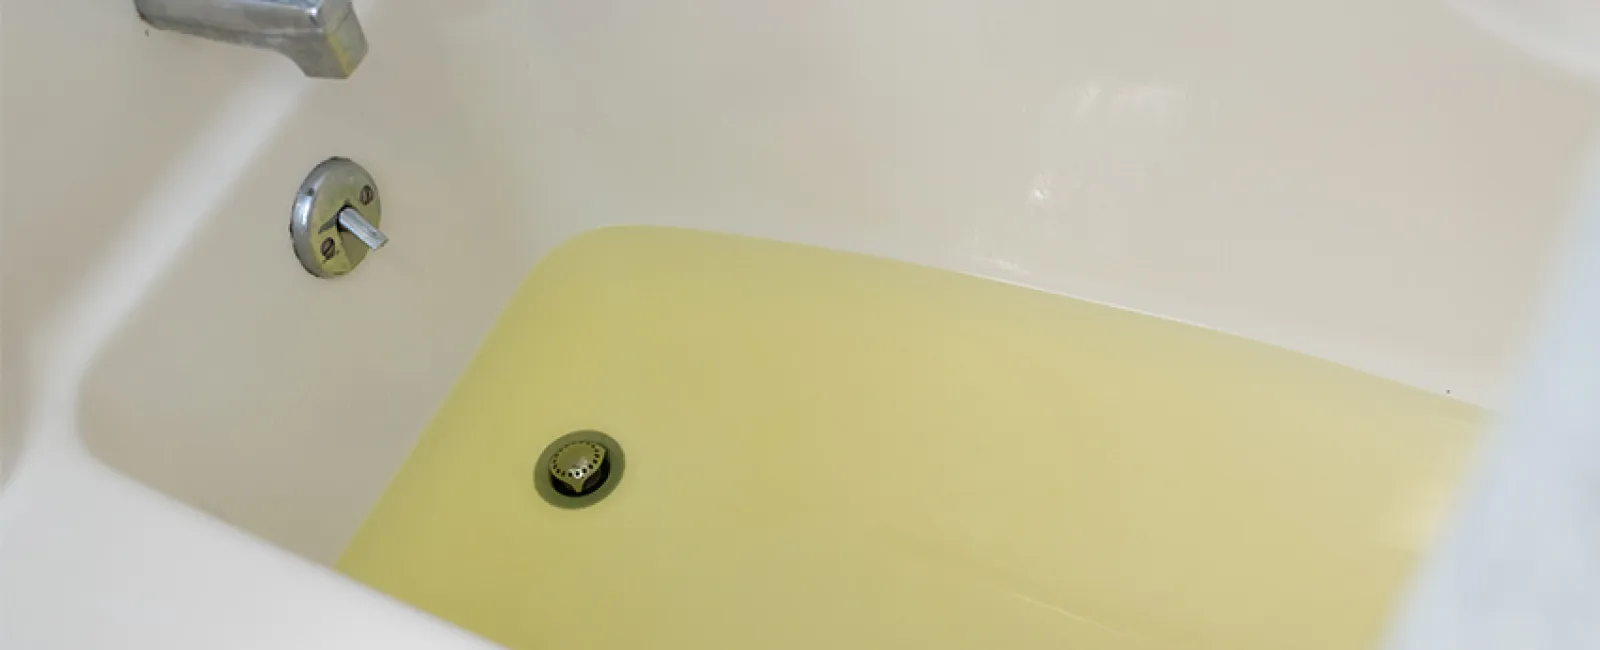 Why Is My Bathwater Yellow?